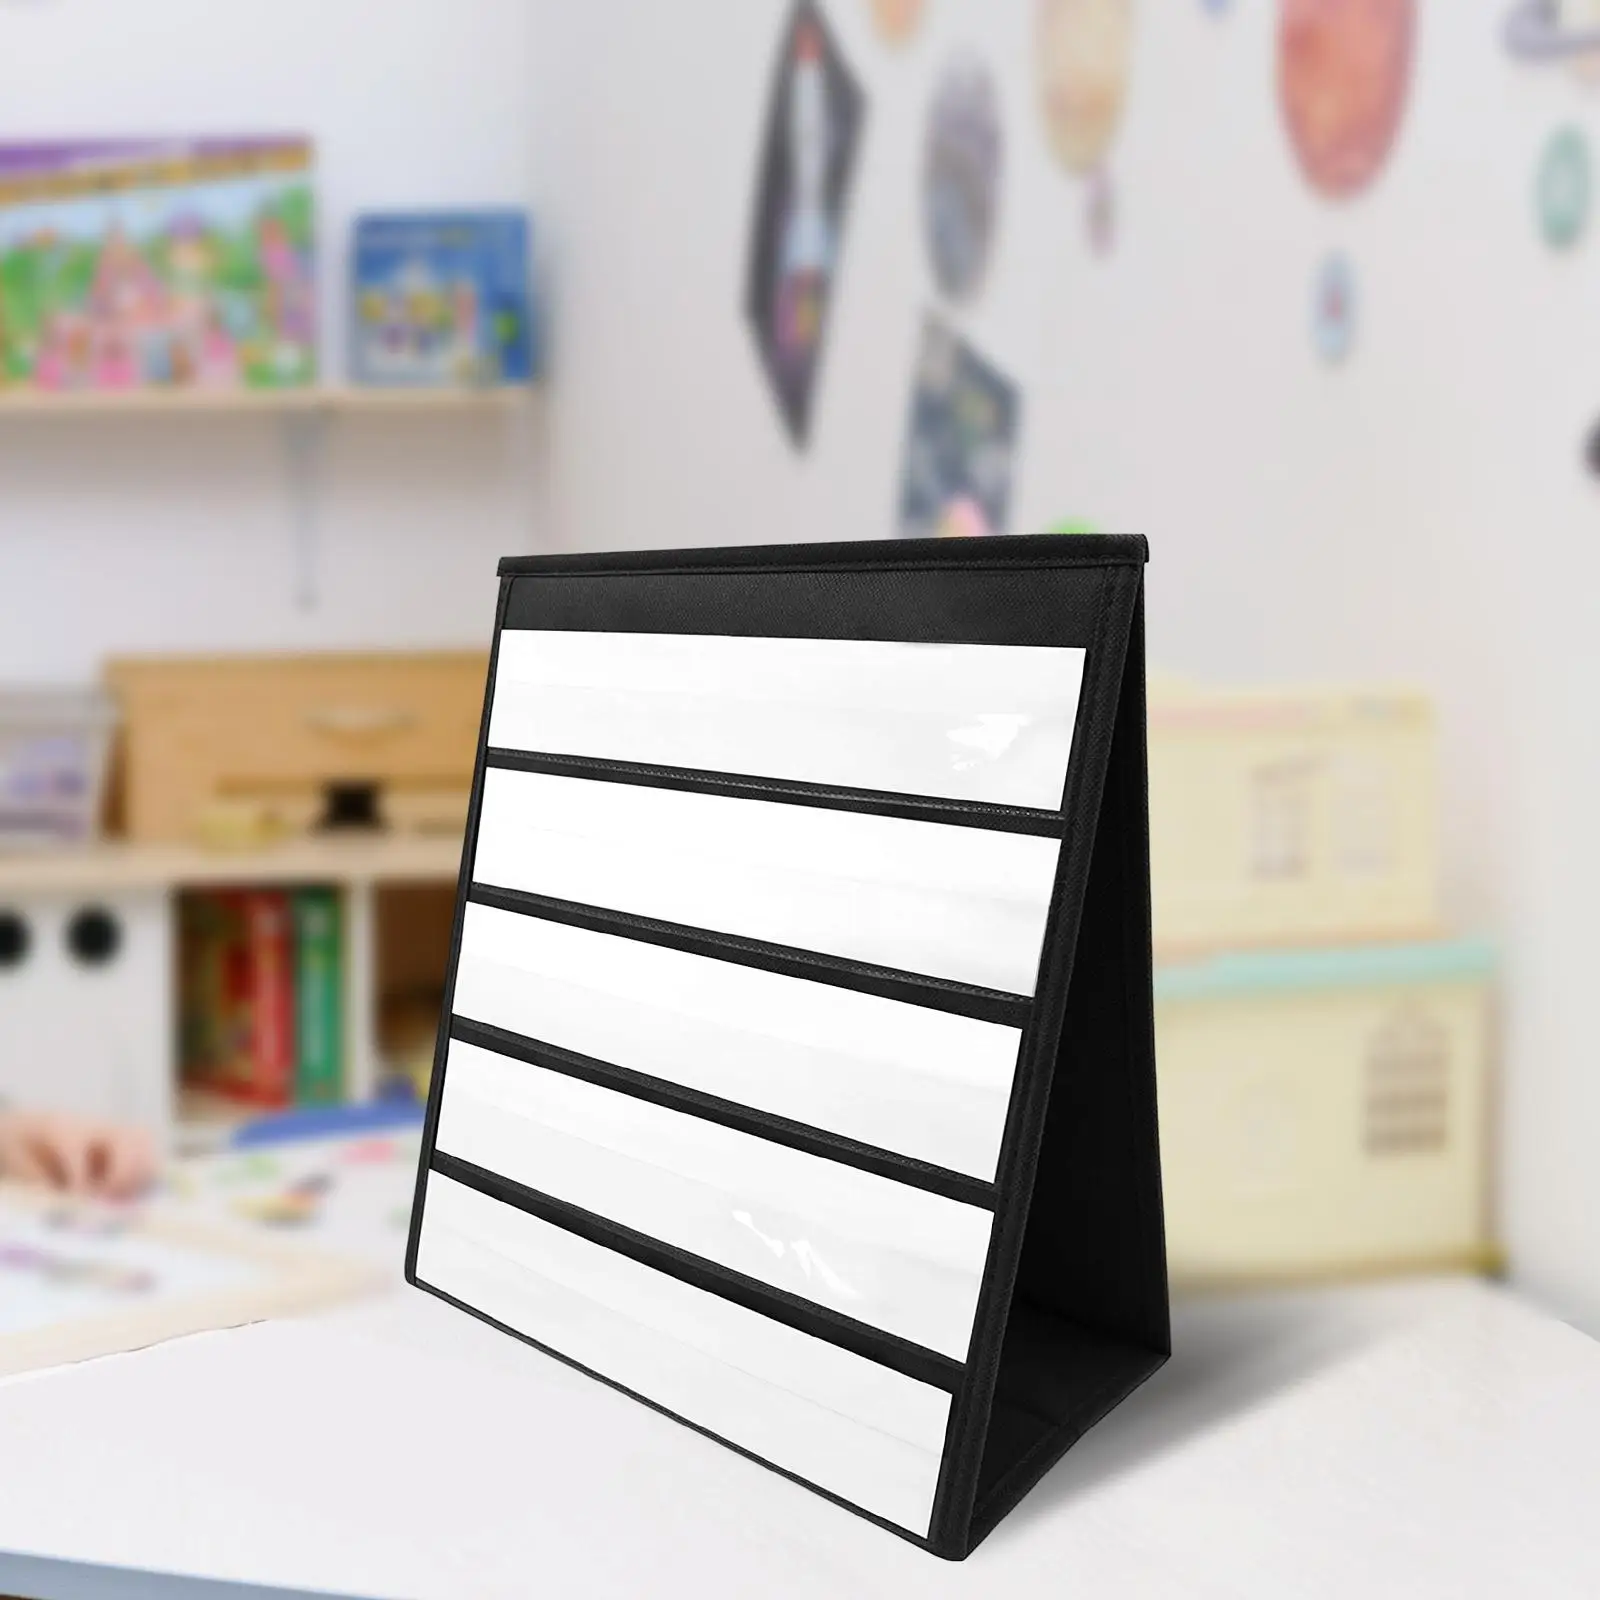 Tabletop Pocket Chart with 20x Whiteboard Cards Reading Self Standing Educational Words black for Children Desktop